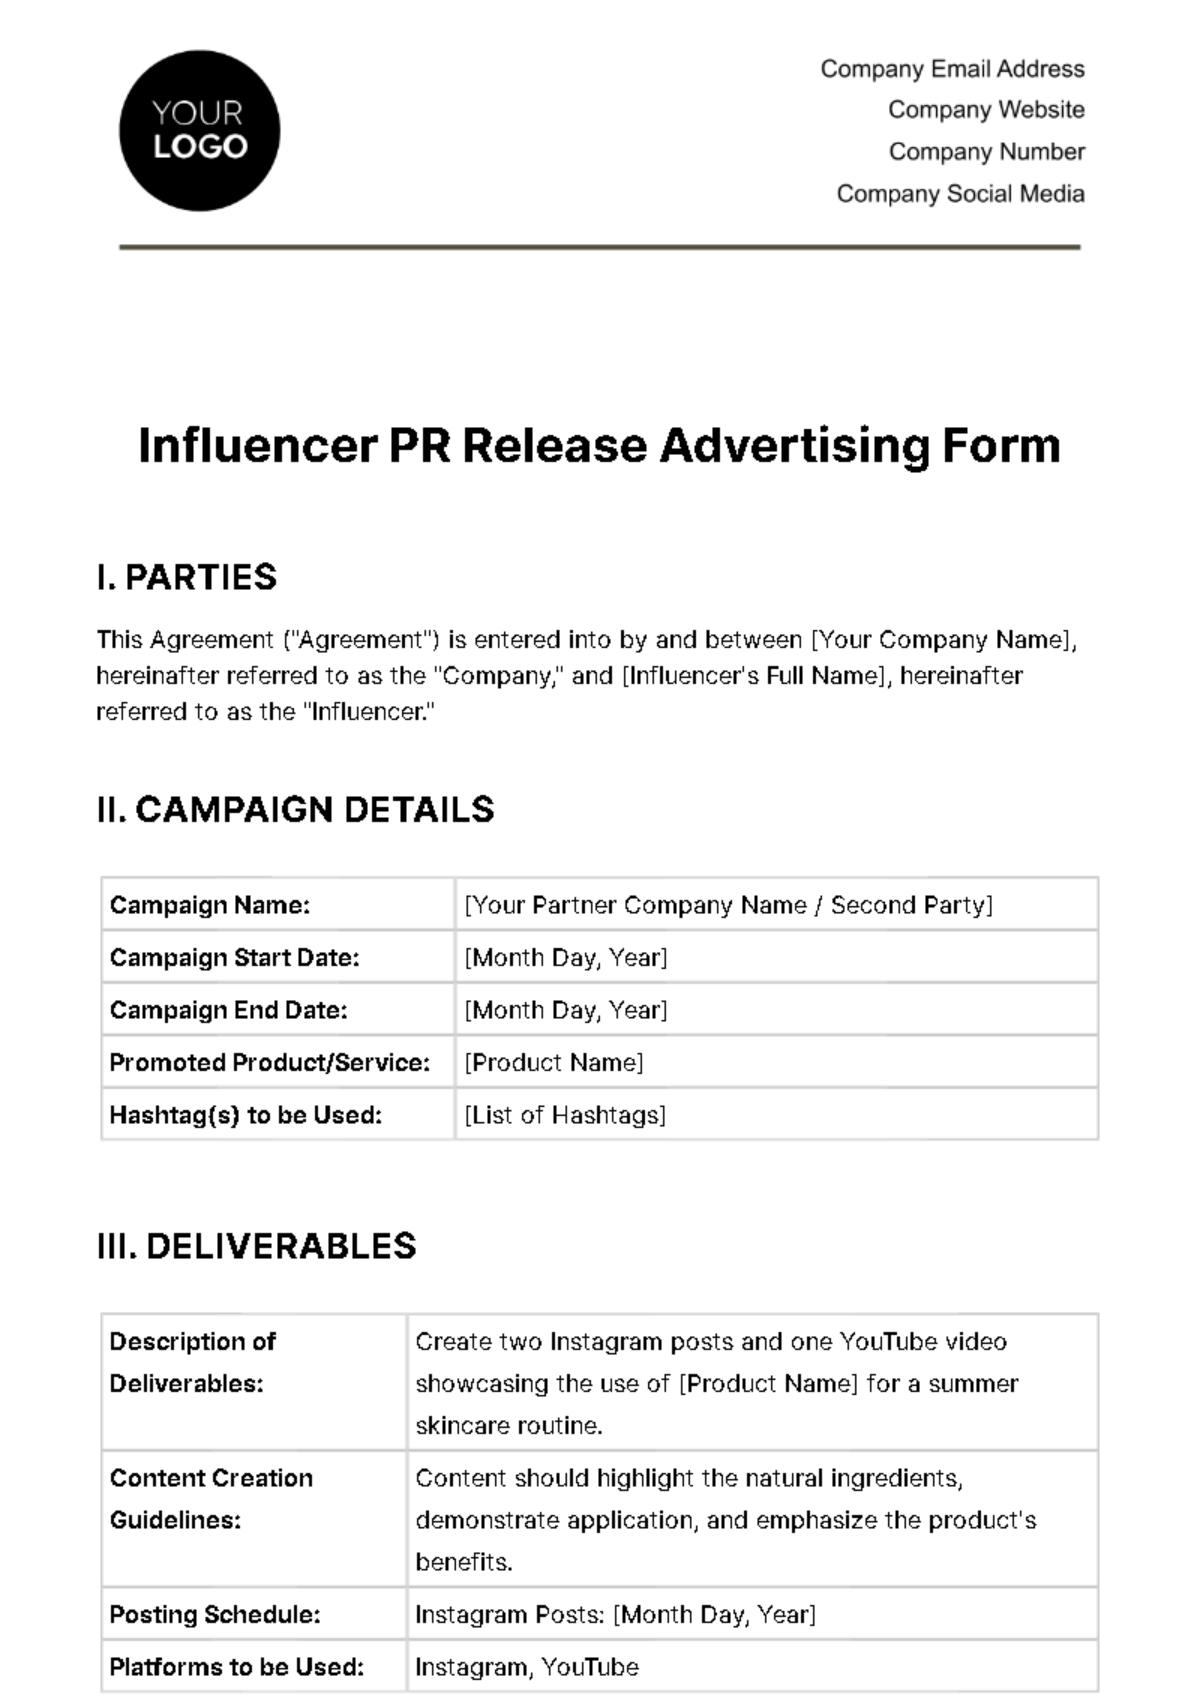 Free Influencer PR Release Advertising Form Template 